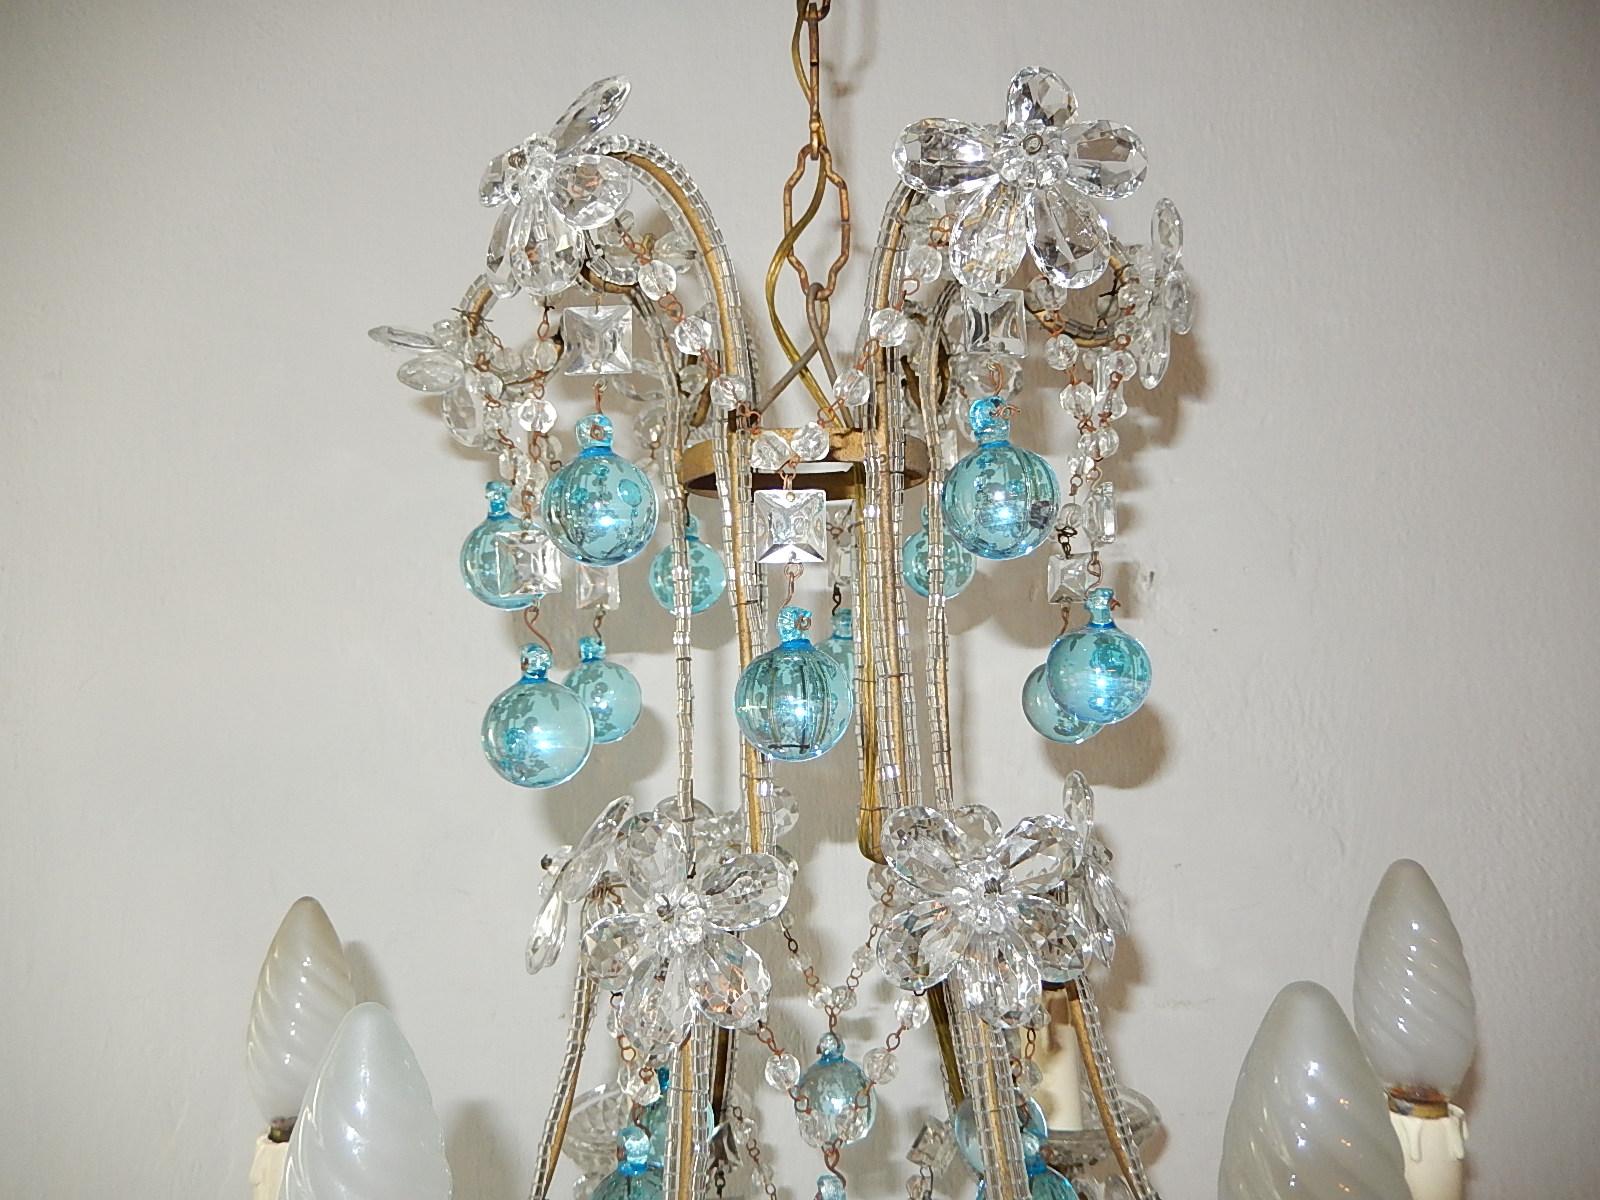 Early 20th Century Aqua Blue French Maison Baguès Style Beaded Crystal Prisms & Flowers Chandelier